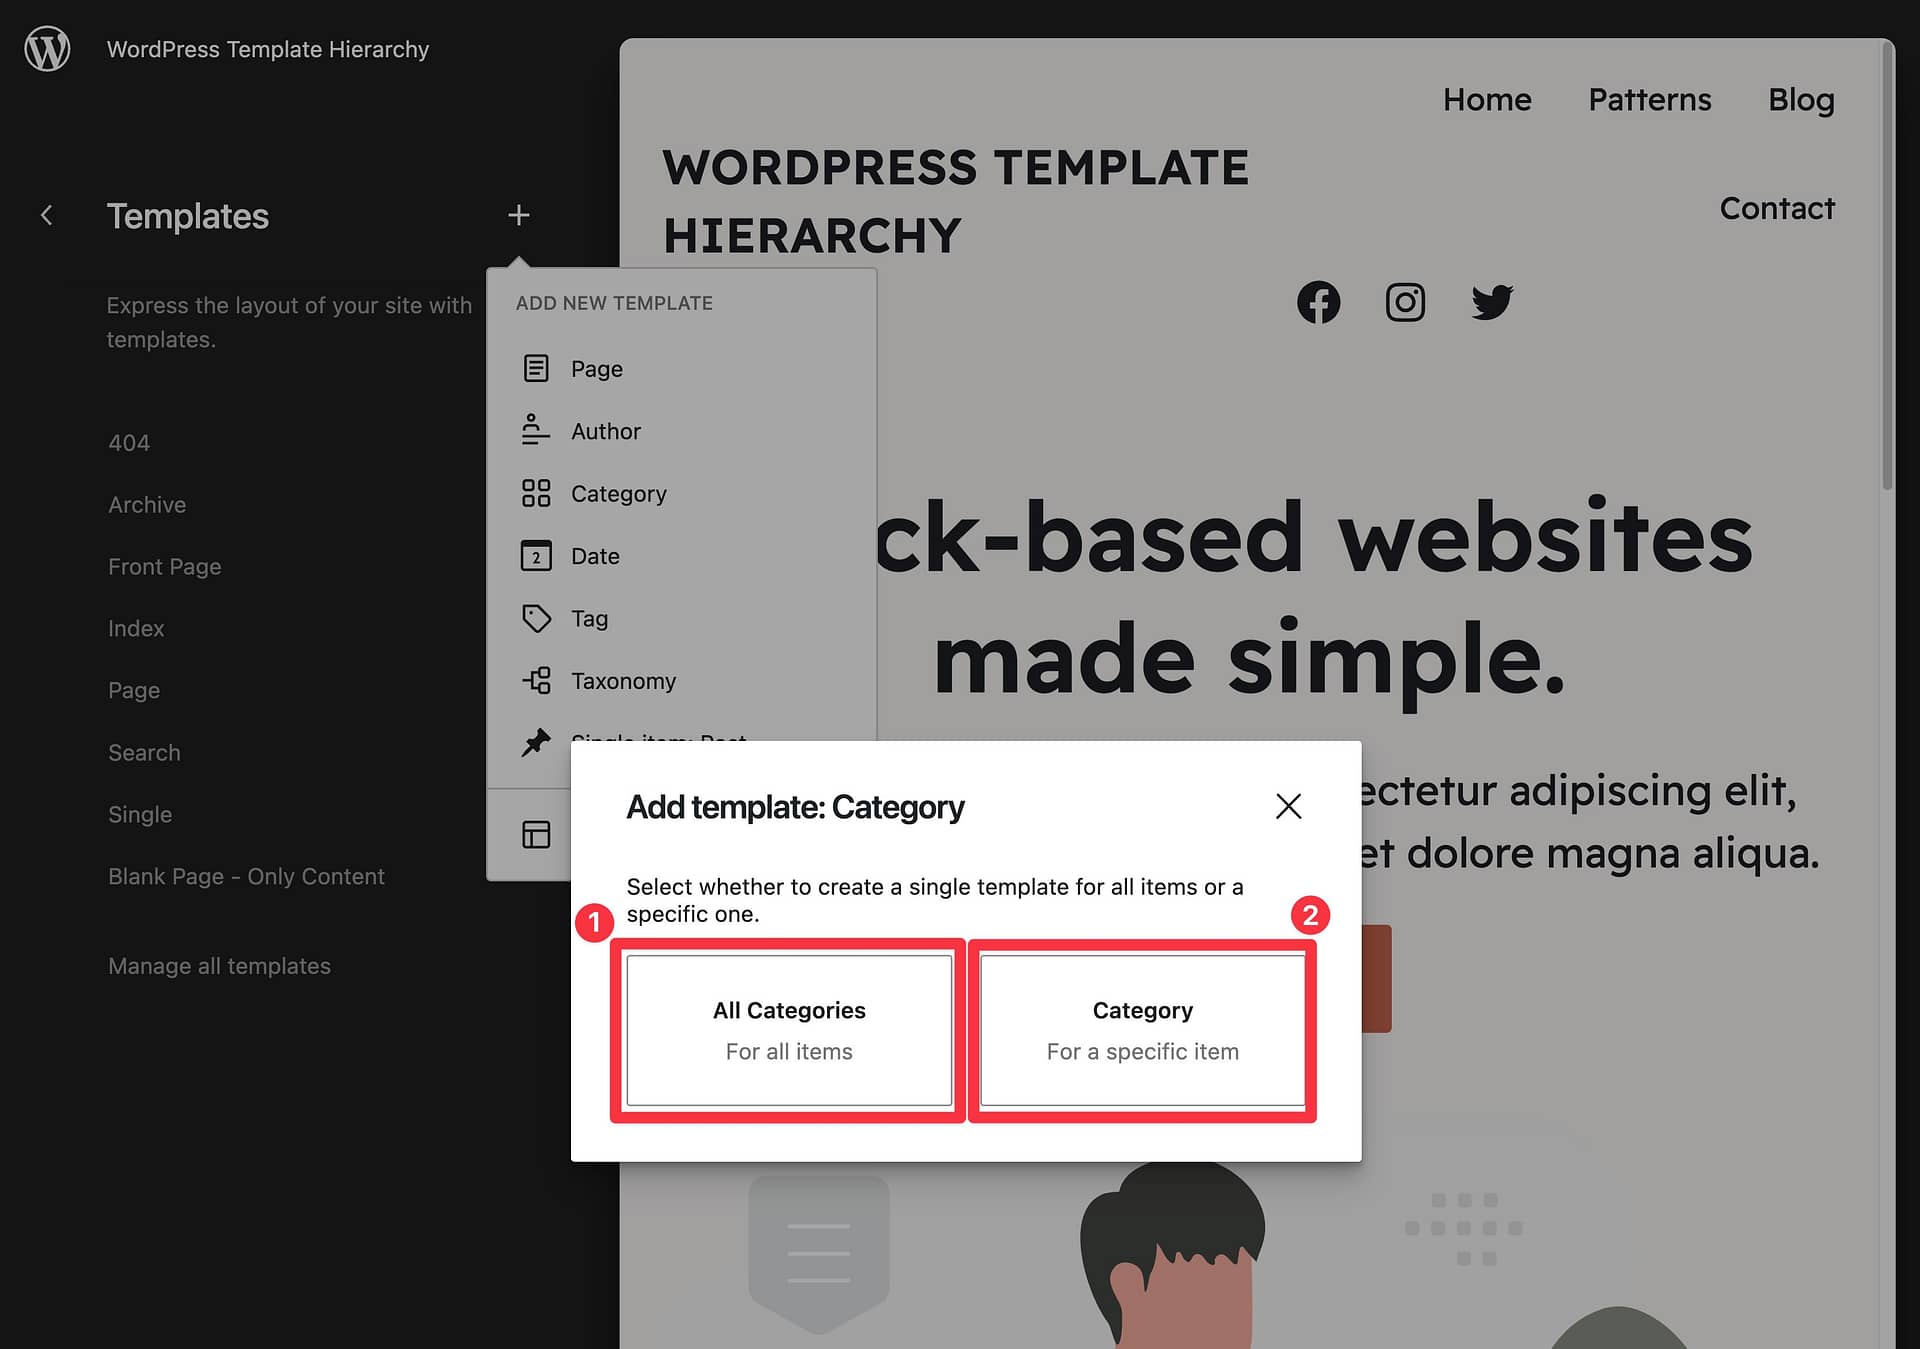 The Site Editor explains the template hierarchy in plain text.